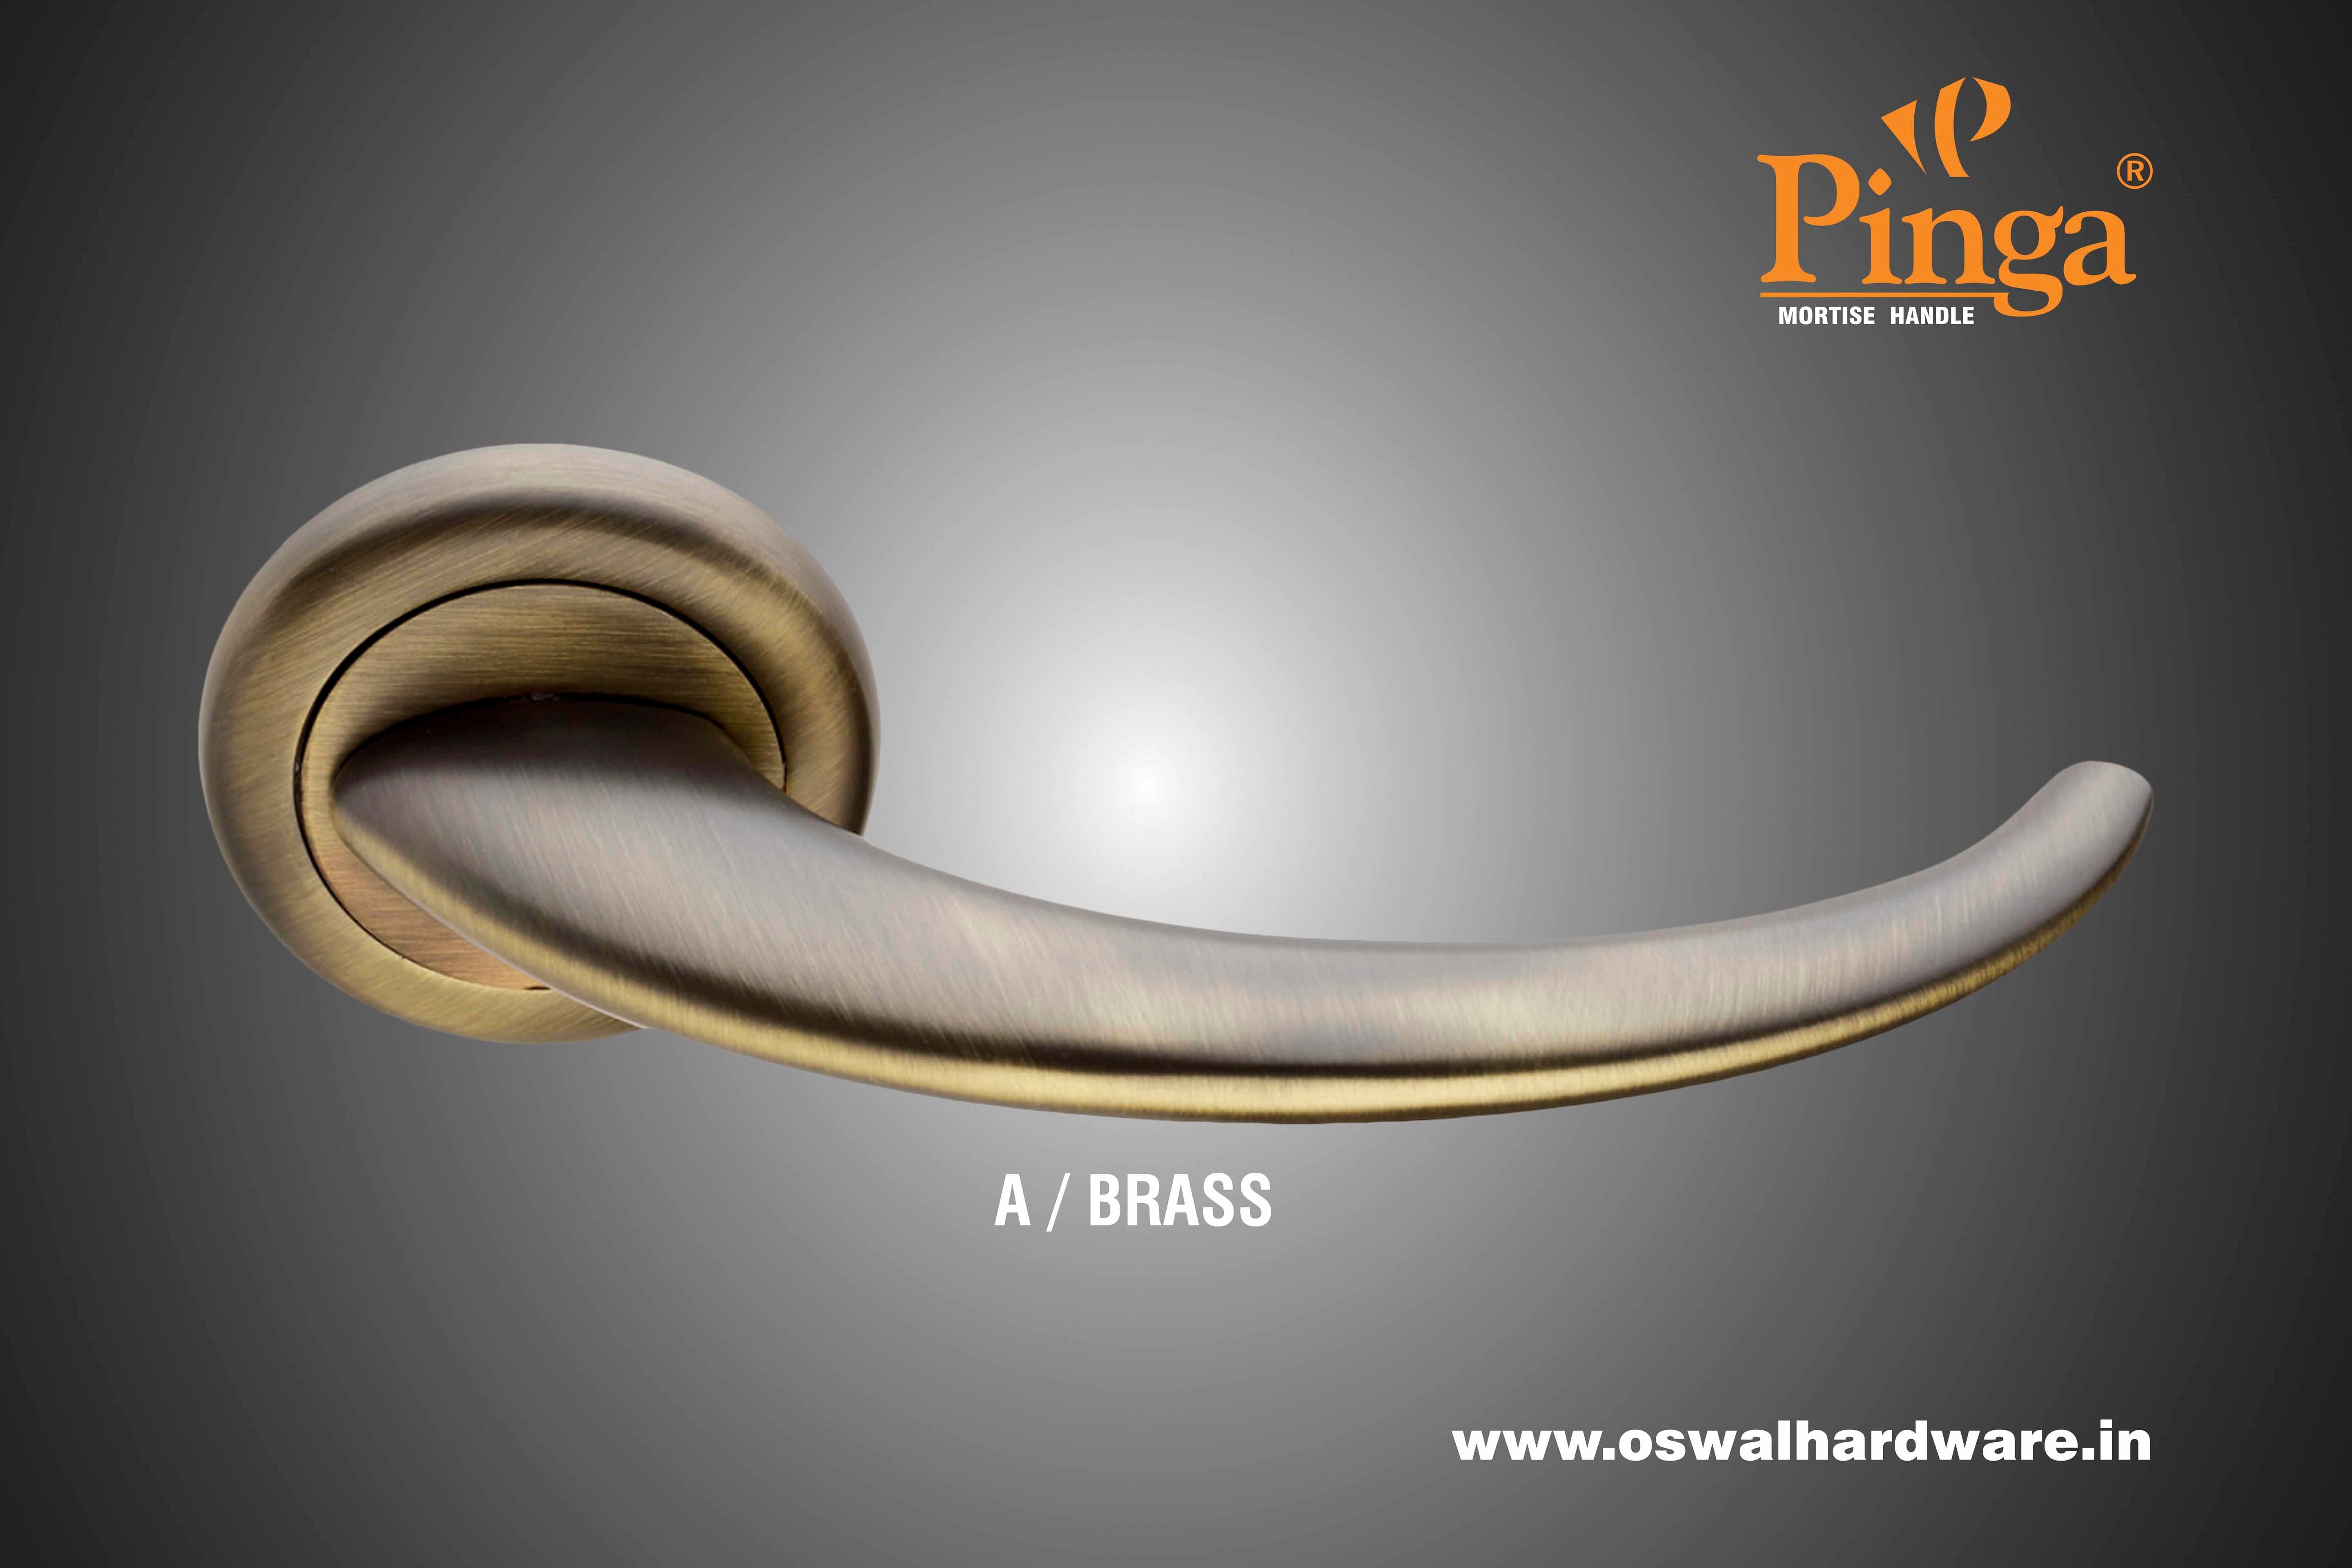 Mortise Handle Brass 2005